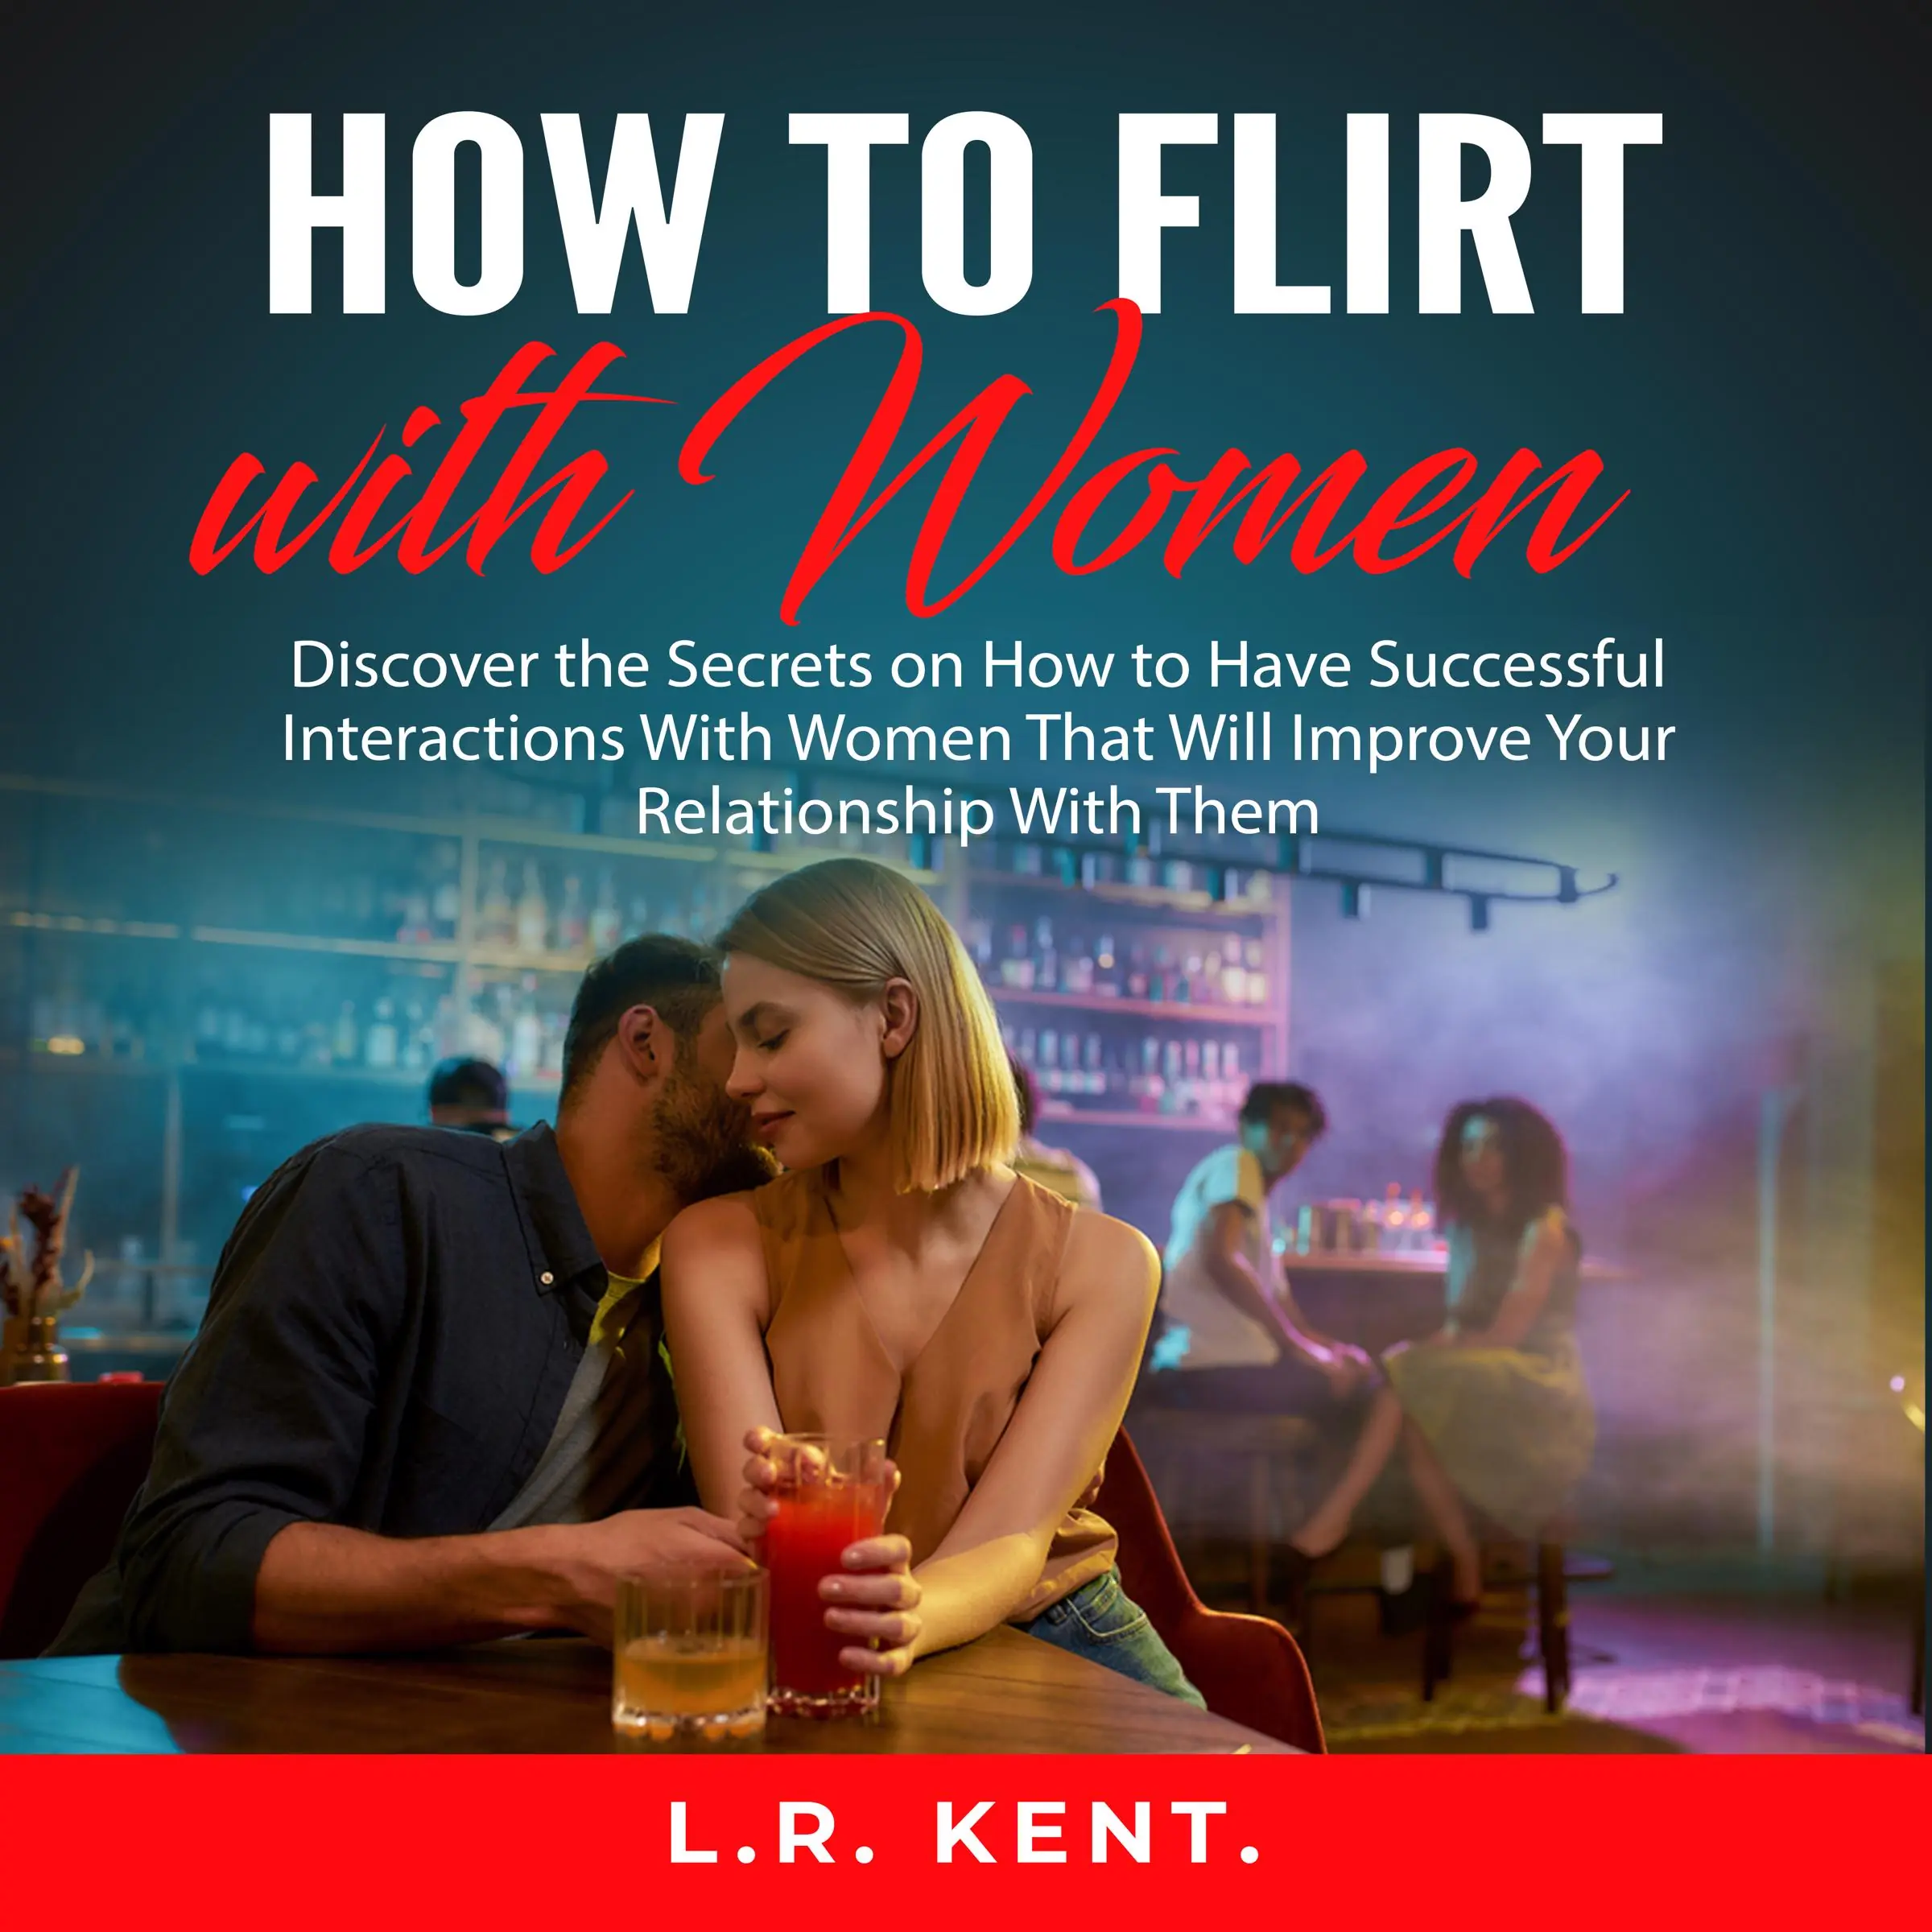 How to Flirt with Women: Discover the Secrets on How to Have Successful Interactions With Women That Will Improve Your Relationship With Them Audiobook by L.R. Kent